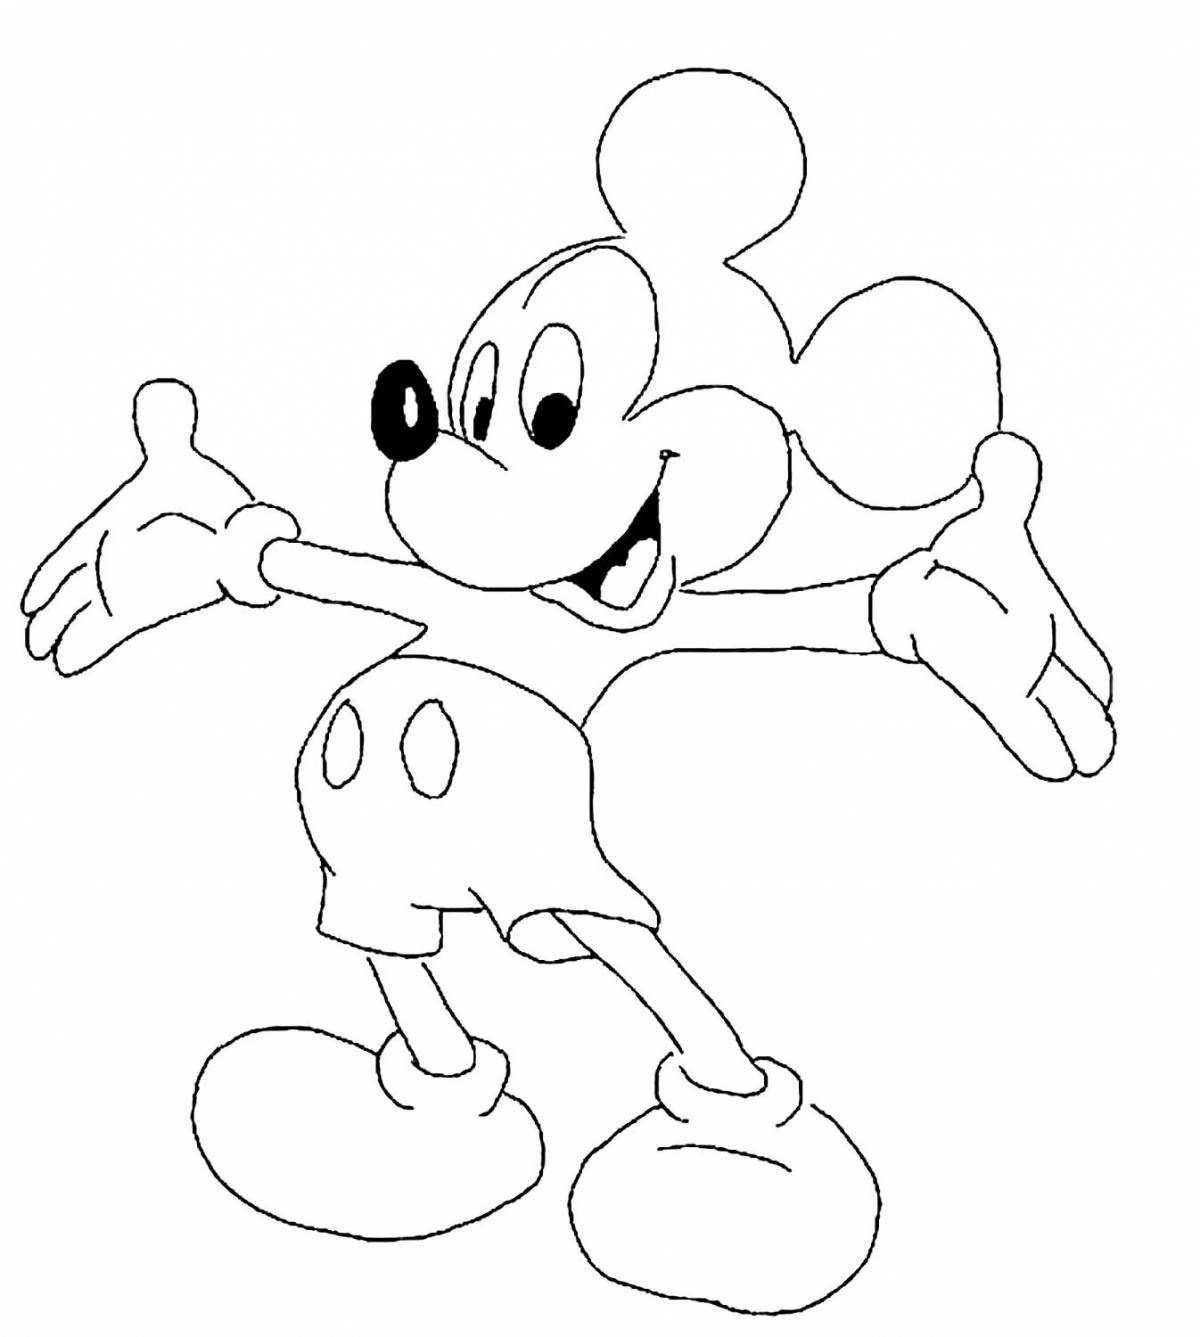 Lively cartoon character coloring page